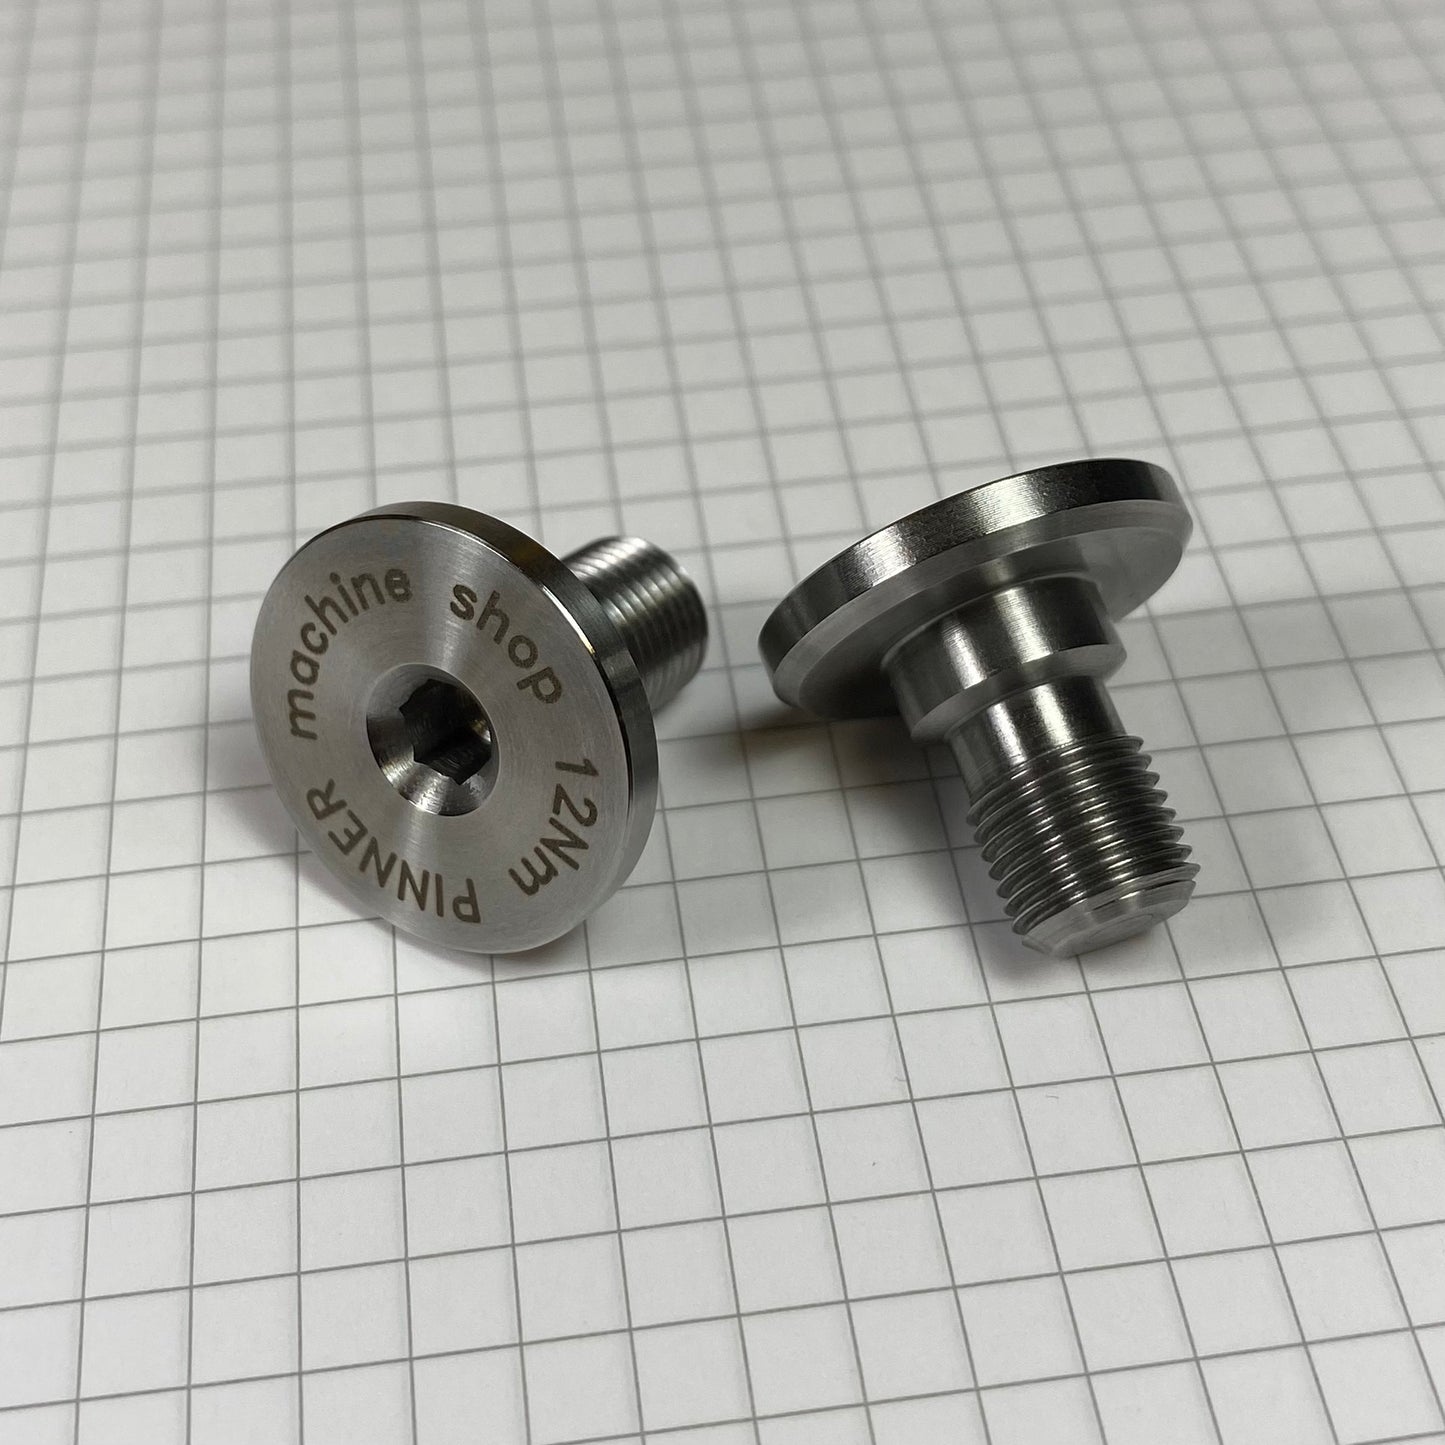 Trunnion Bolts for the We Are One Arrival